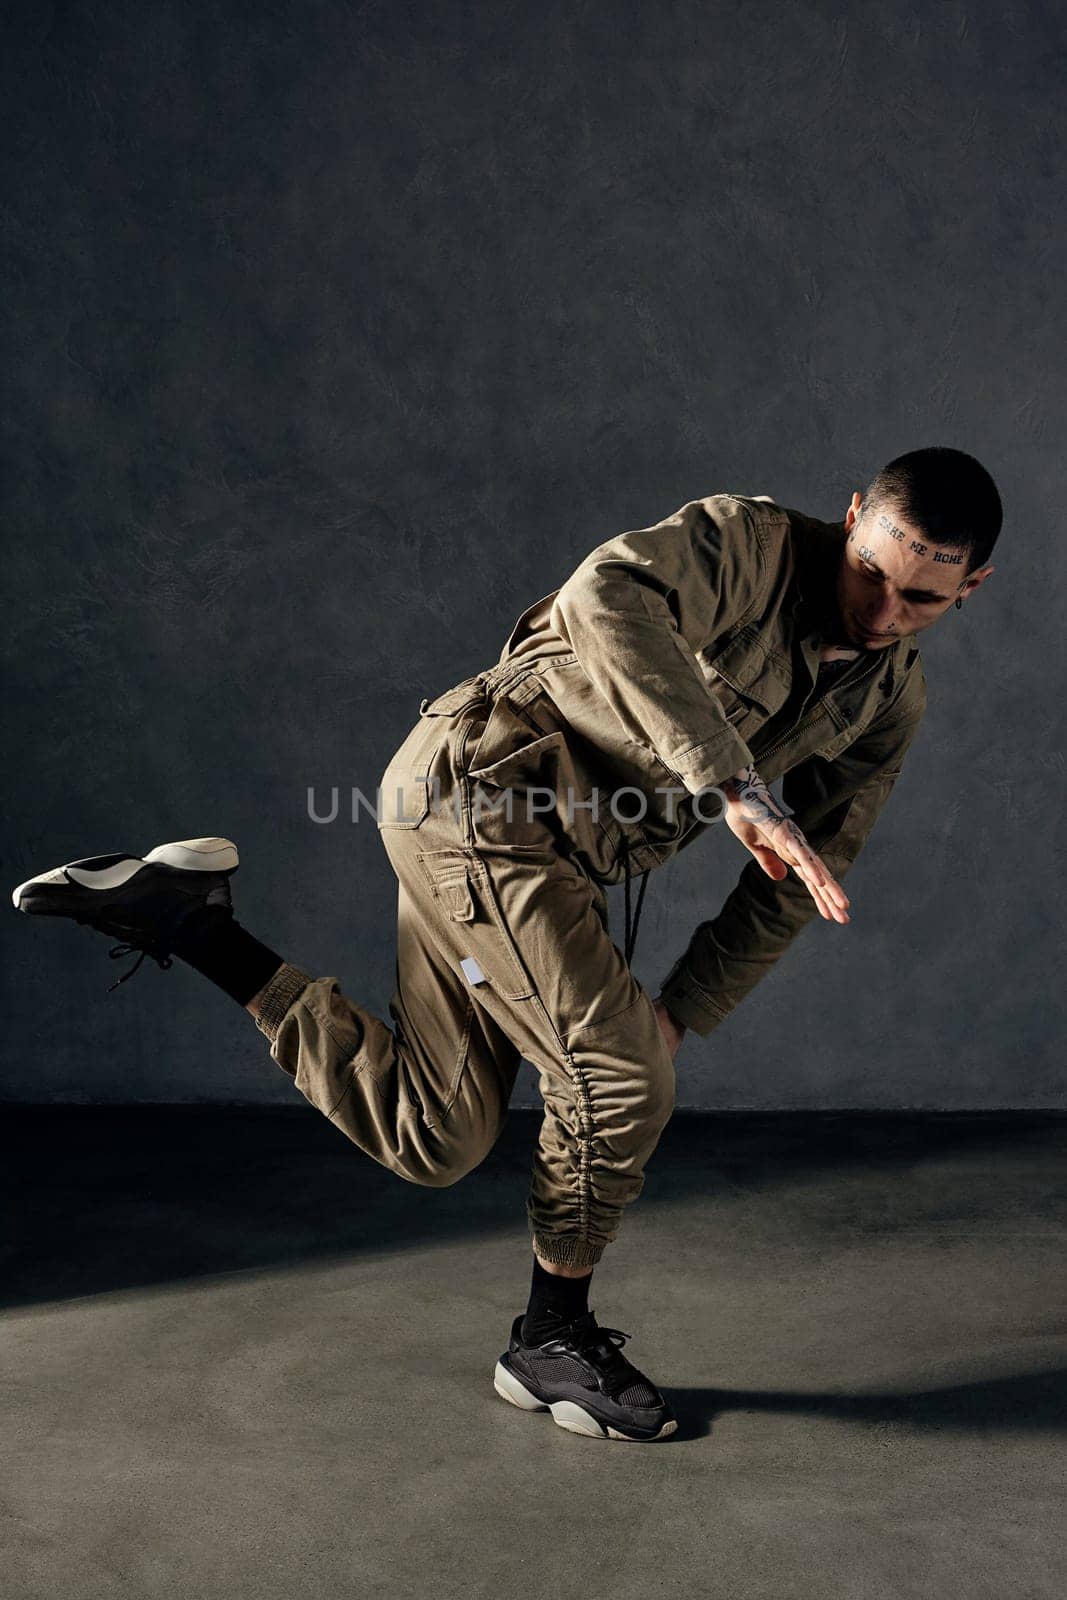 Handsome fellow with tattooed body and face, earrings, beard. Dressed in khaki jumpsuit, black sneakers. Dancing, gray background. Dancehall, hip-hop by nazarovsergey